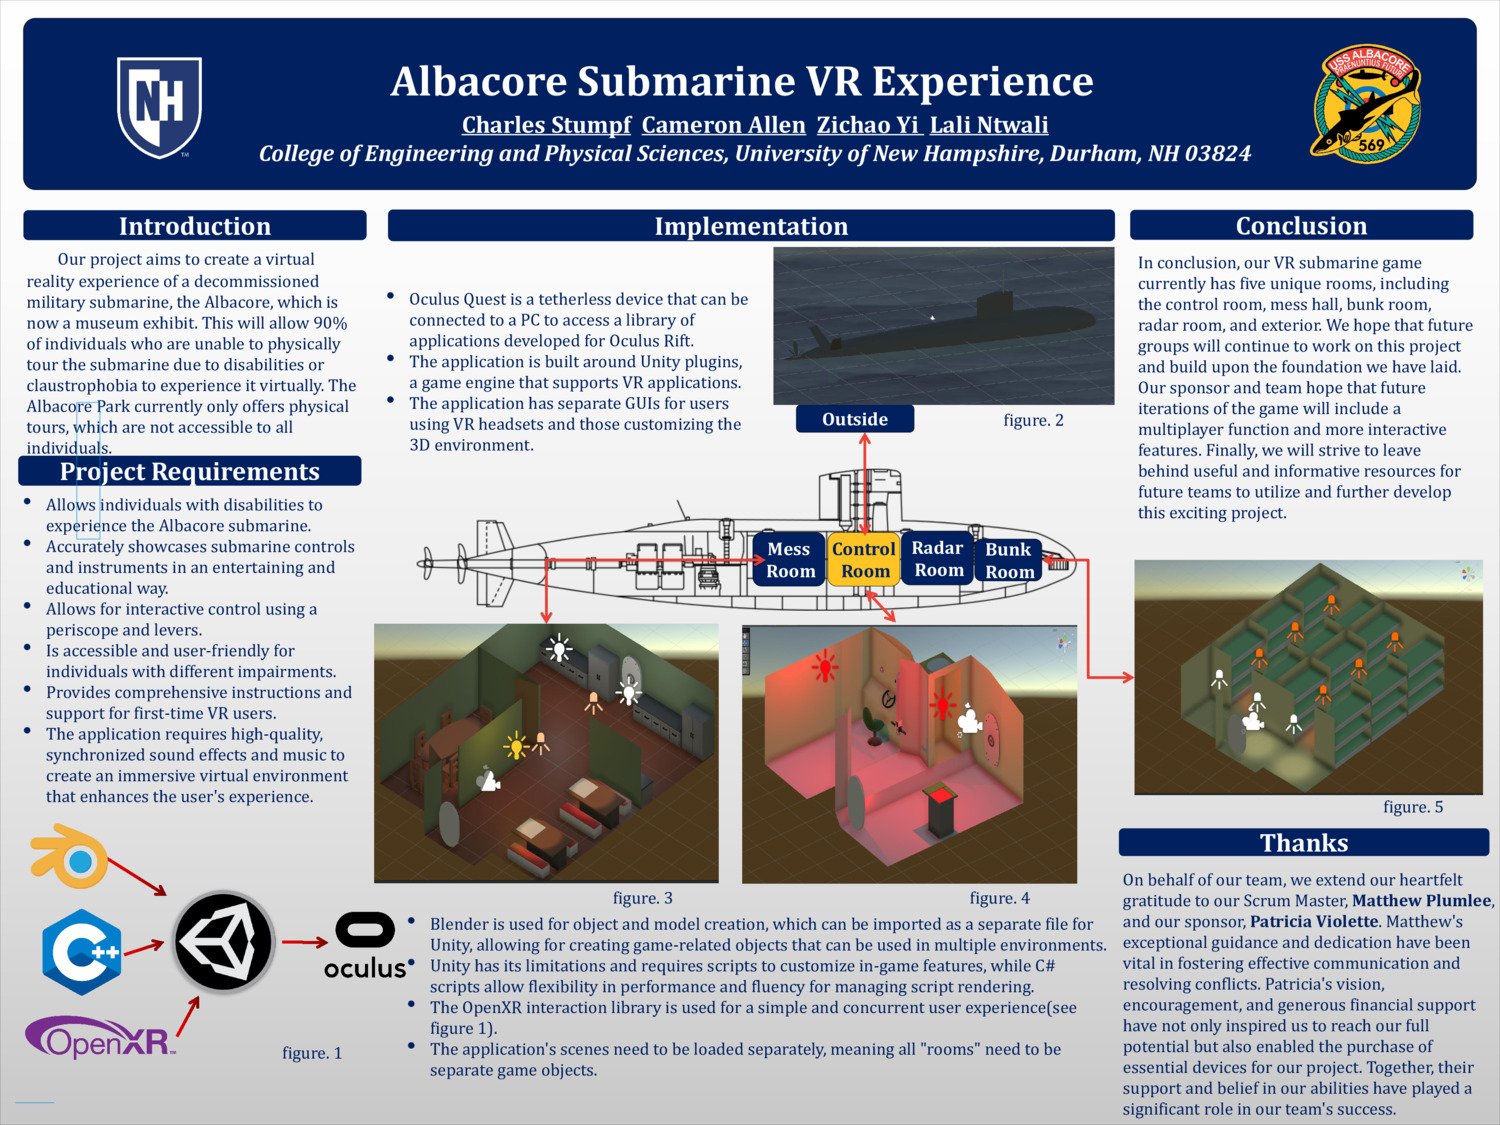 Uss Albacore Vr Experience by cwa1001